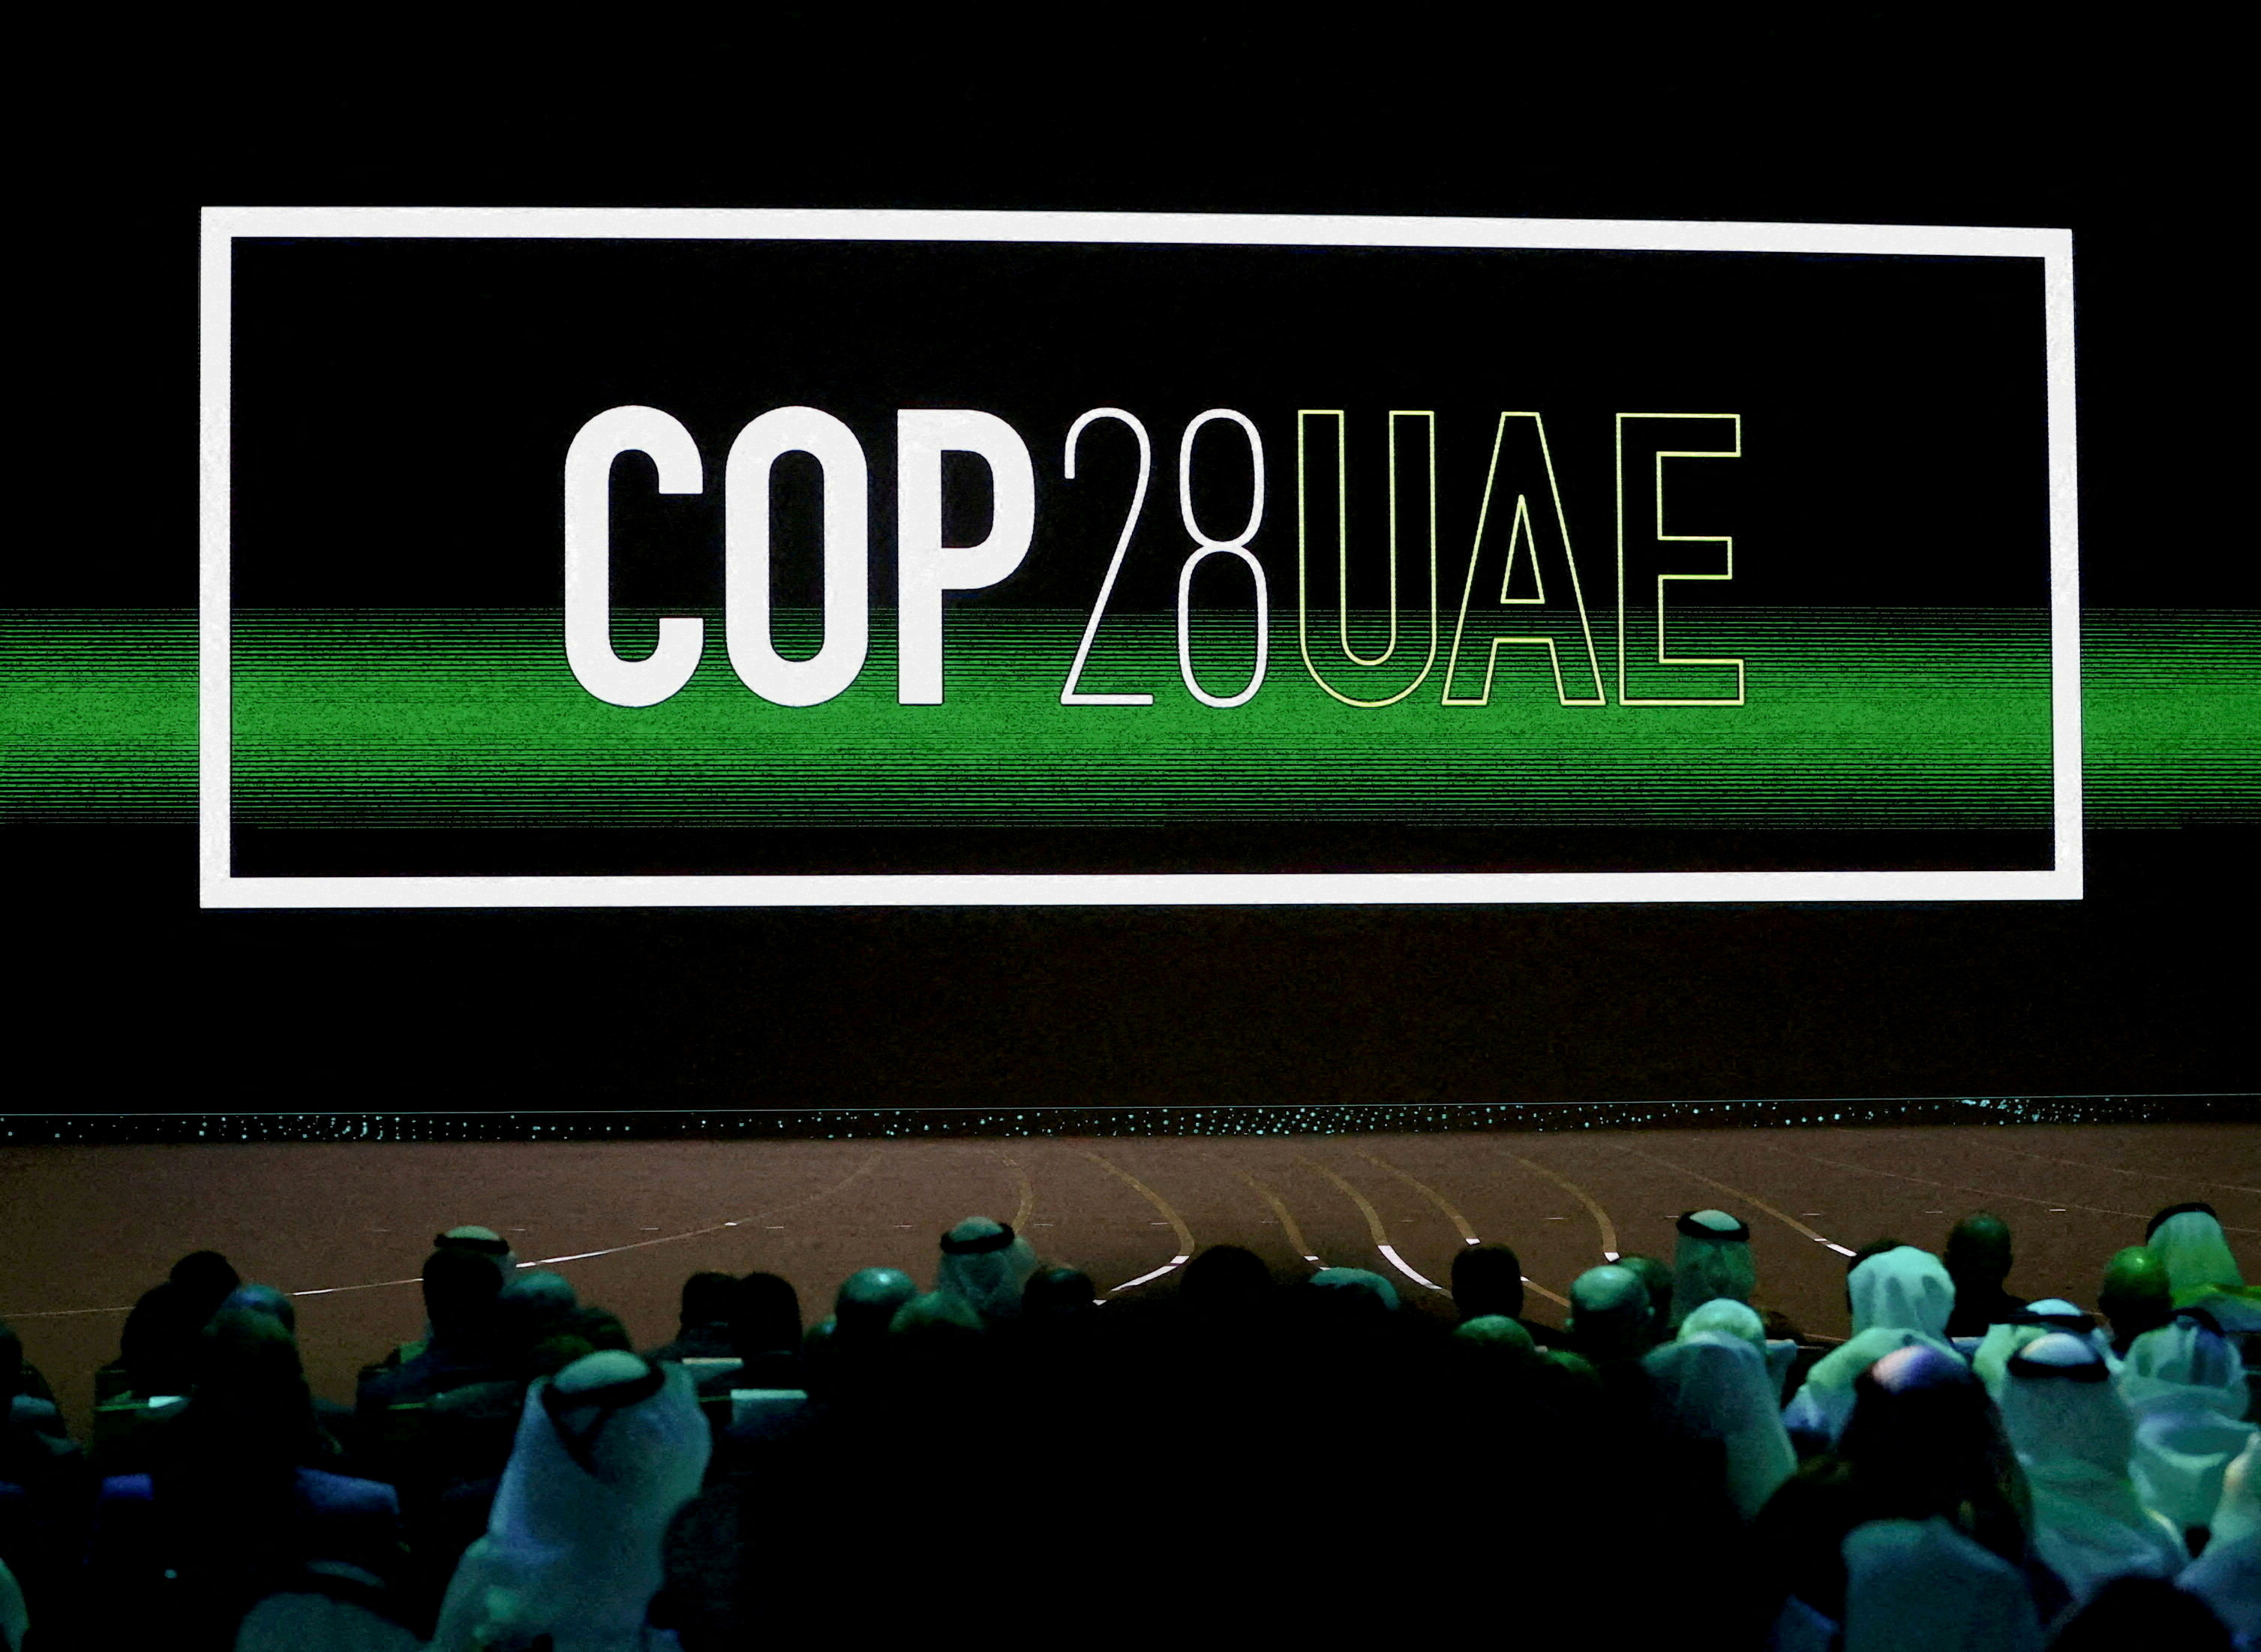 'Cop28 UAE' logo is displayed on the screen during the opening ceremony of Abu Dhabi Sustainability Week (ADSW) under the theme of 'United on Climate Action Toward COP28', in Abu Dhabi